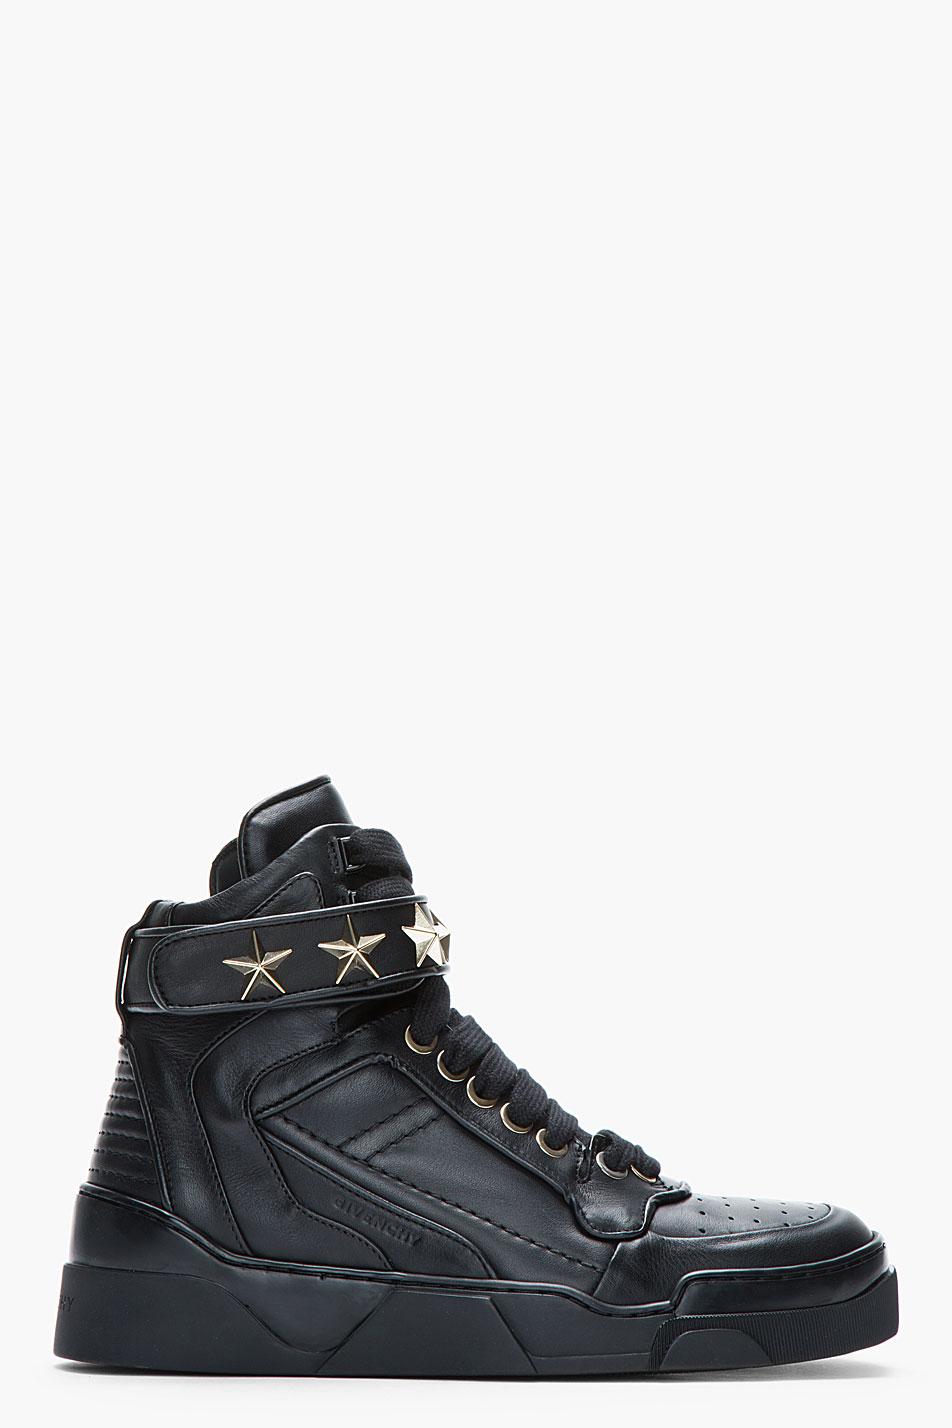 Givenchy Black Leather Star_embellished High_top Sneakers